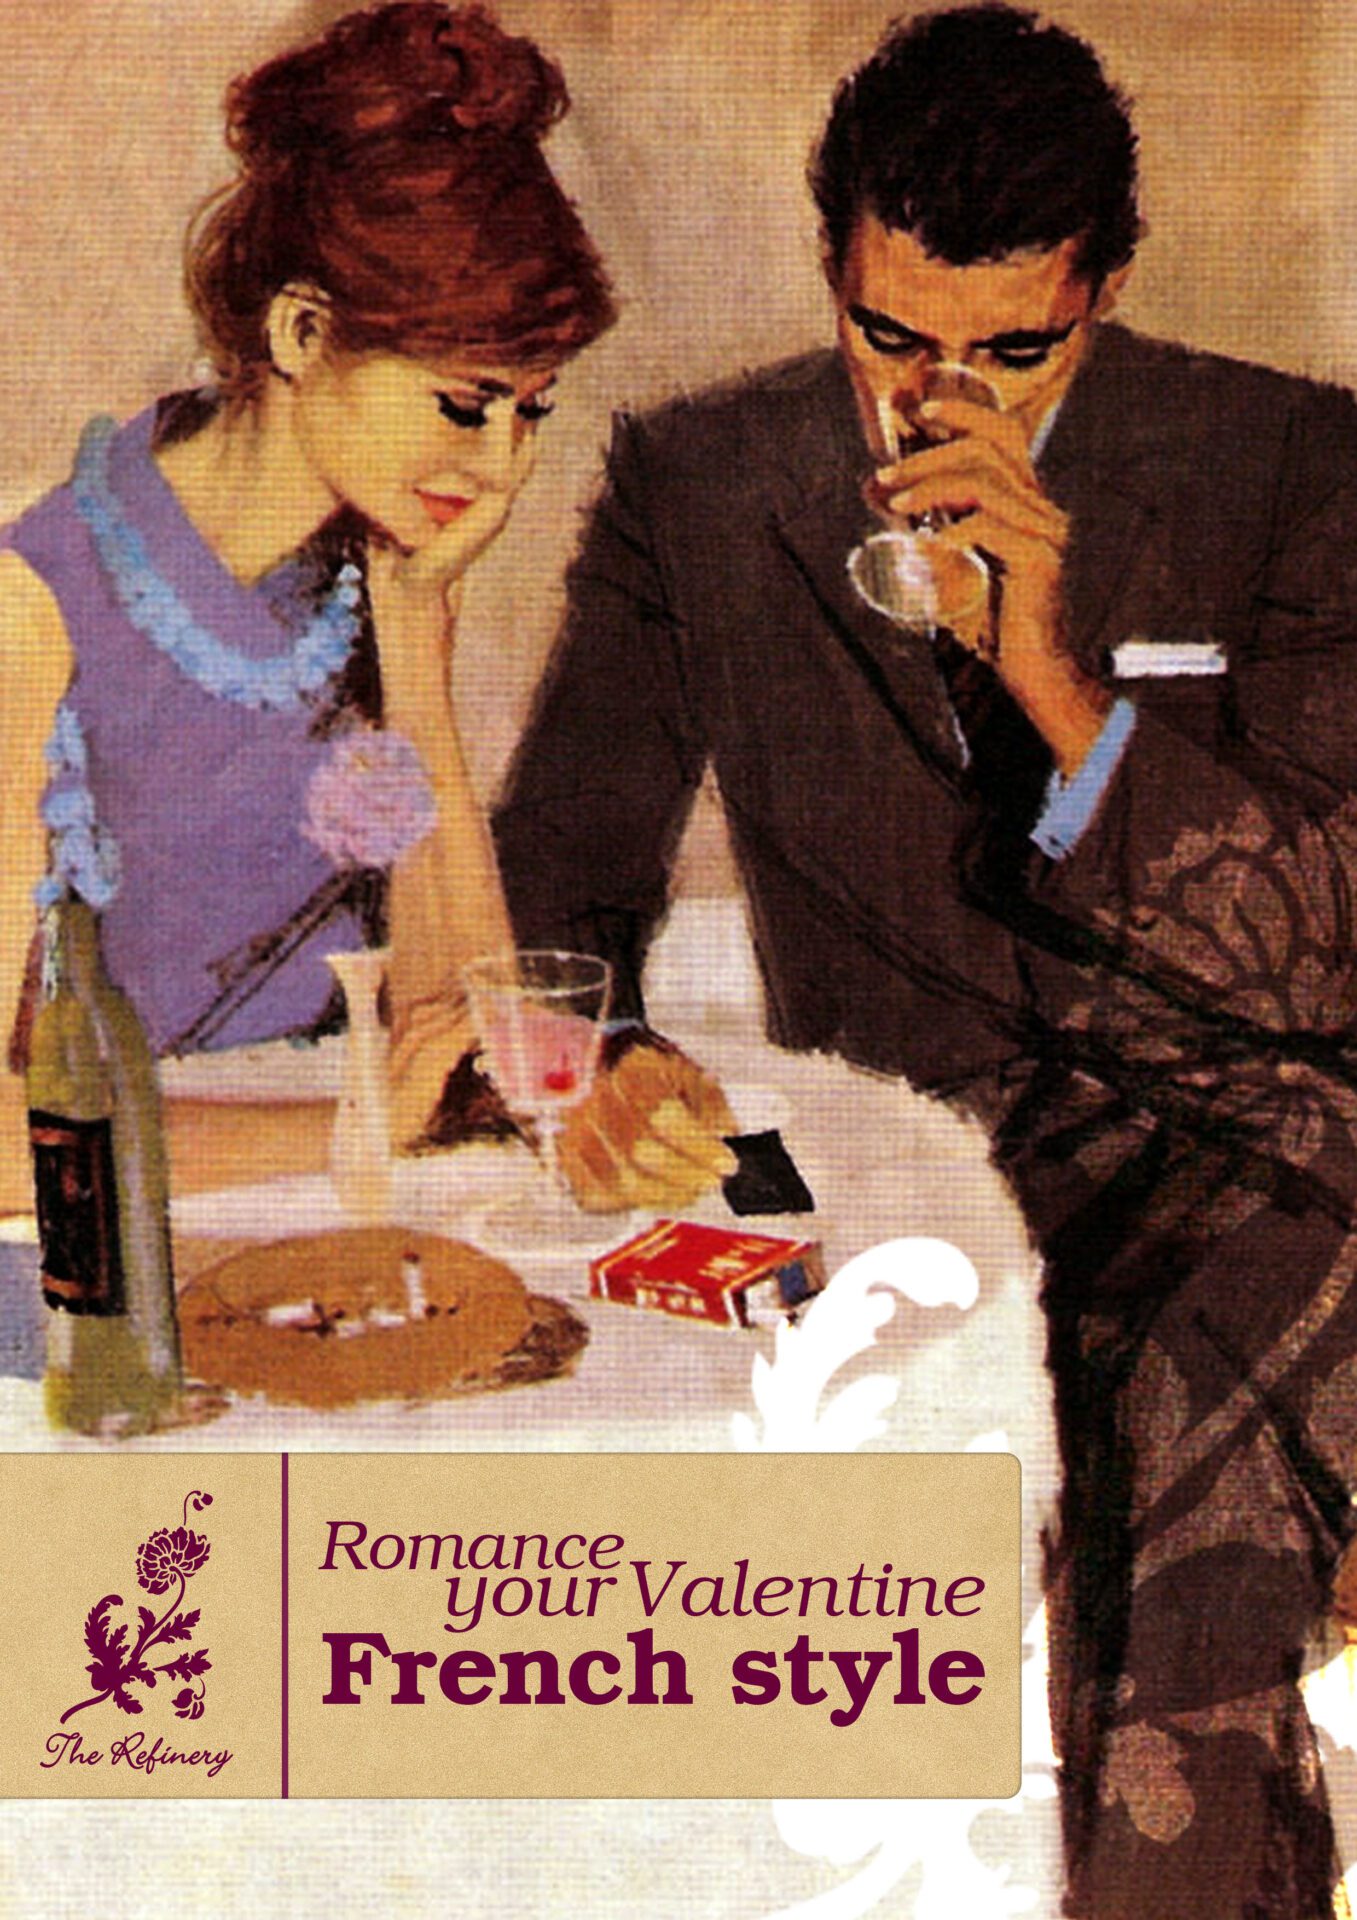 Valentine's Day Poster The Refinery